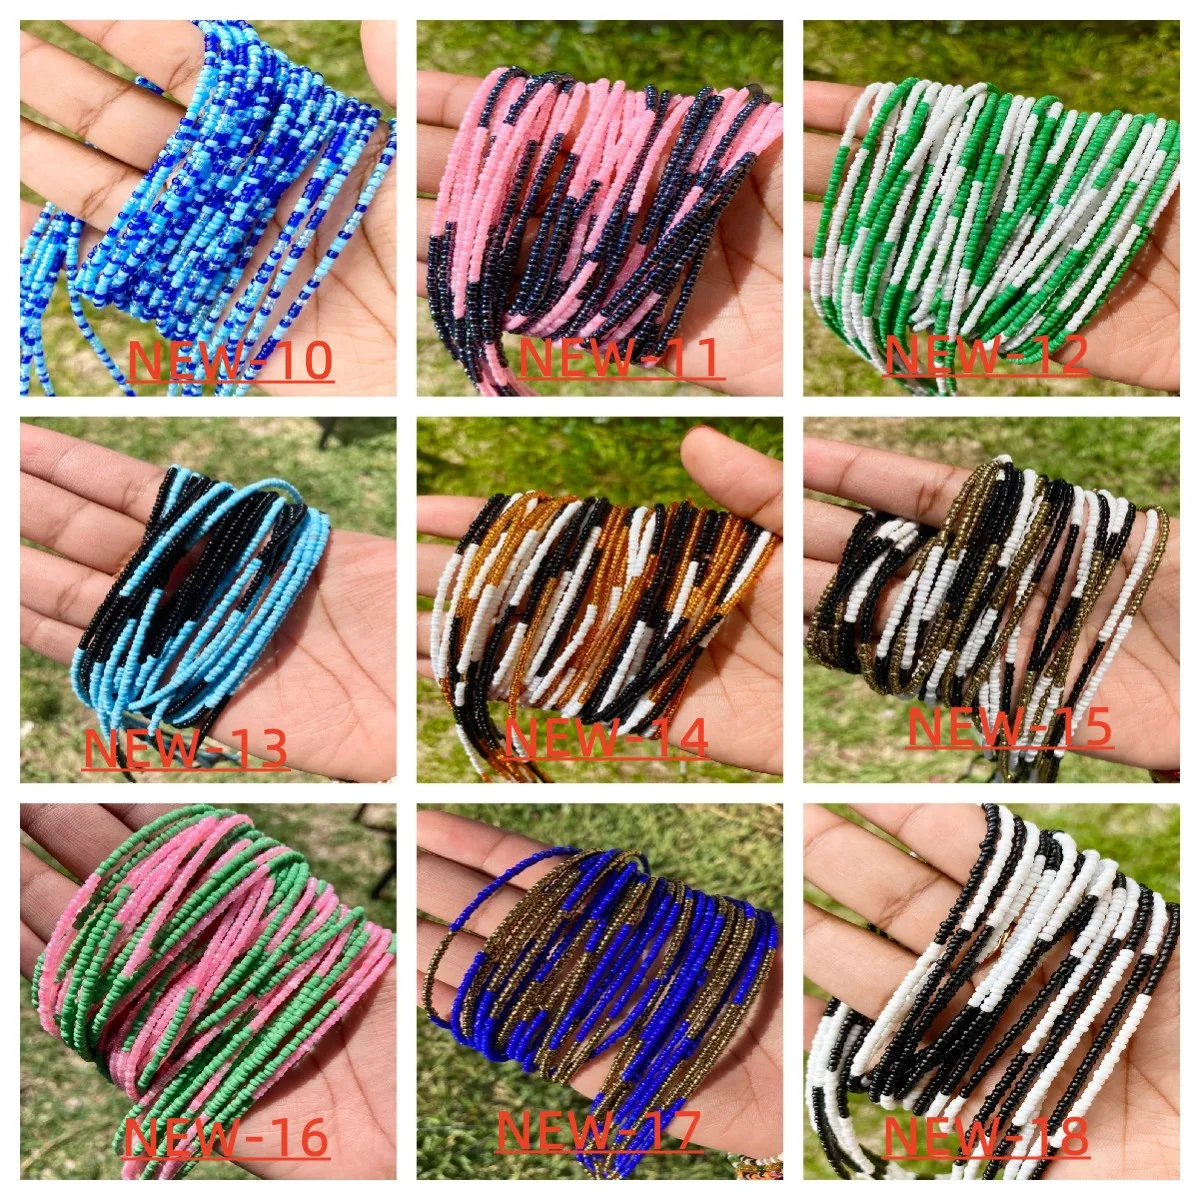 Double Strand Waist Beads, Body Jewelry, Belly Beads, Bead Jewelry, Belly Chains, Elastic Waist Chain, Body African Waists Bead images - 6